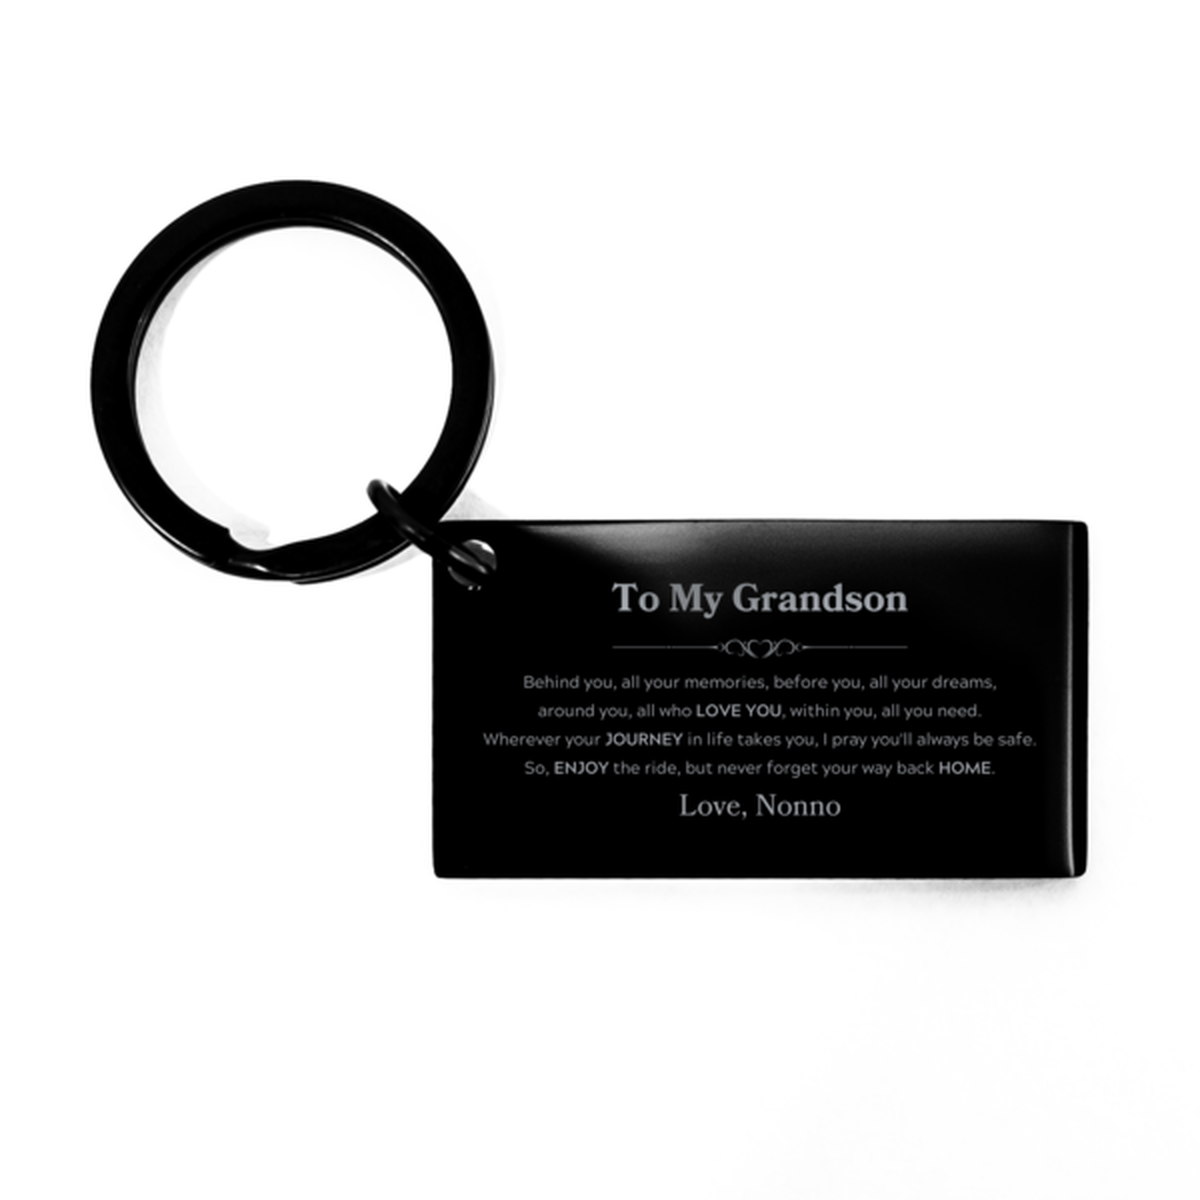 To My Grandson Graduation Gifts from Nonno, Grandson Keychain Christmas Birthday Gifts for Grandson Behind you, all your memories, before you, all your dreams. Love, Nonno